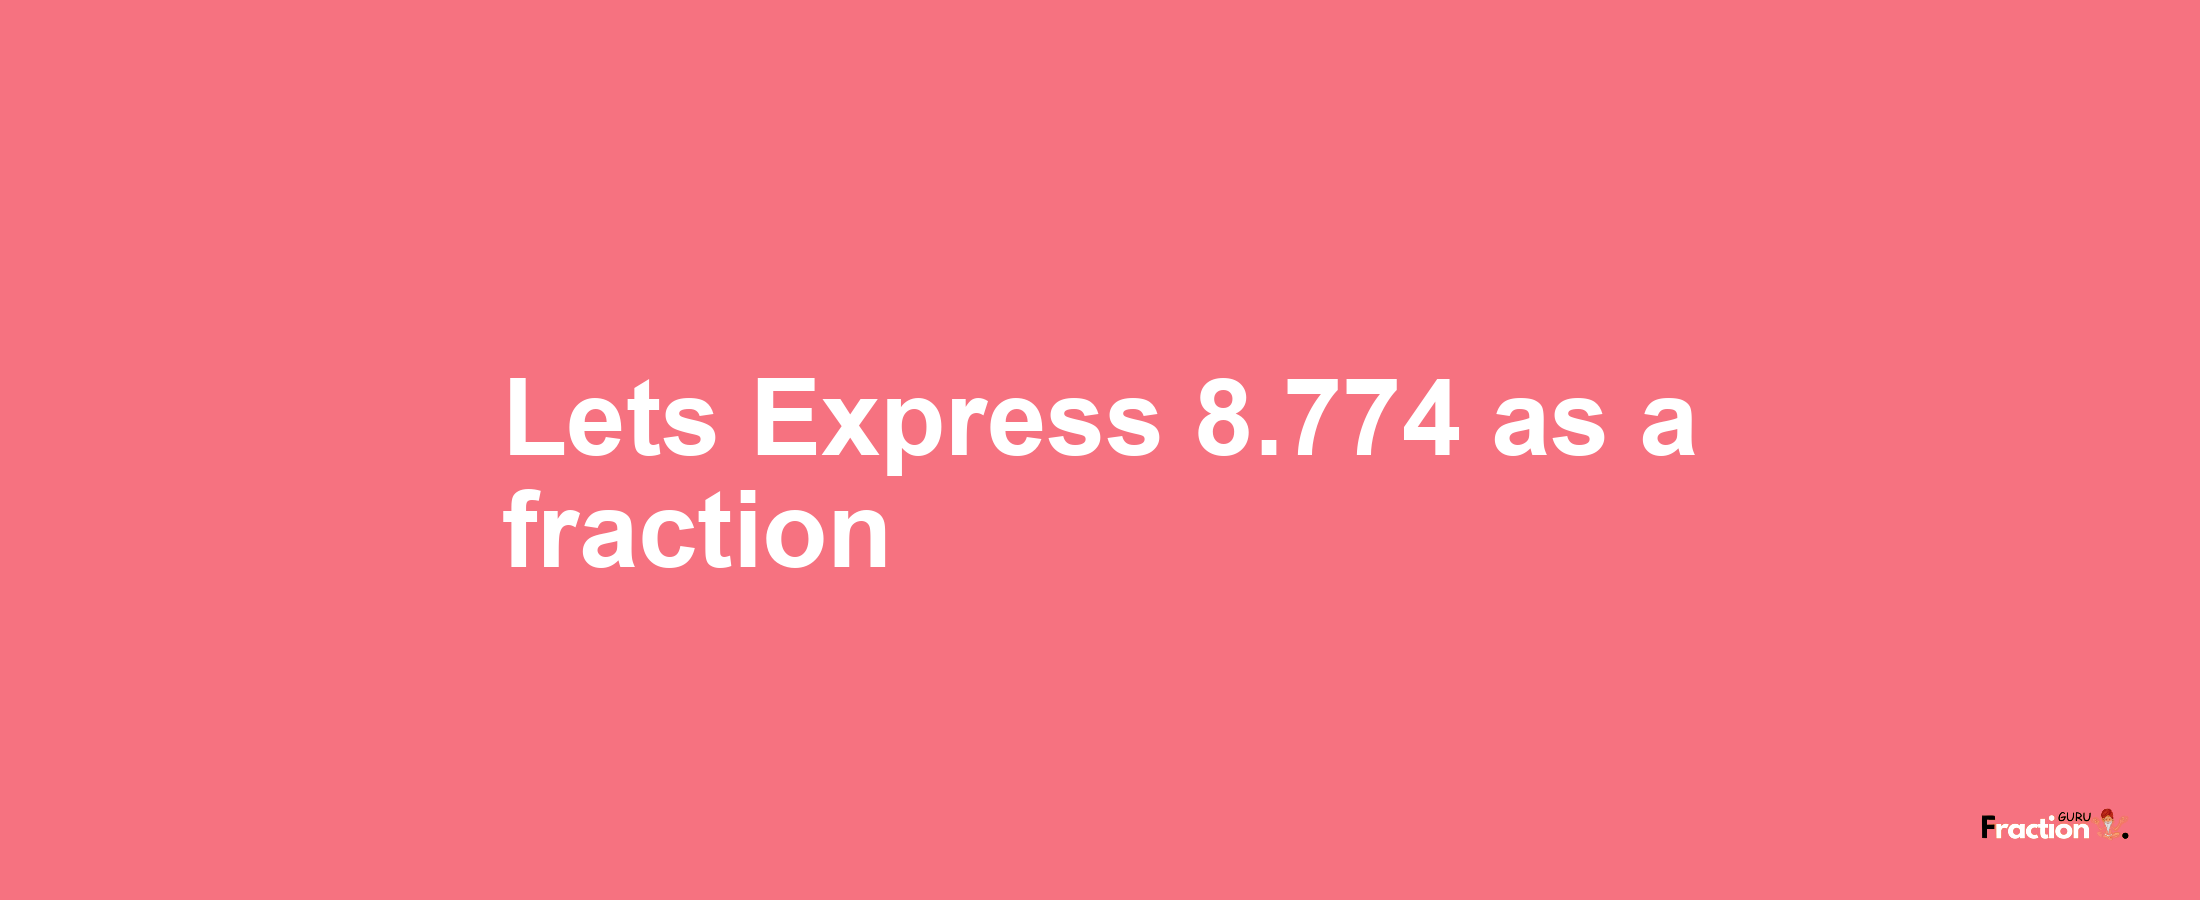 Lets Express 8.774 as afraction